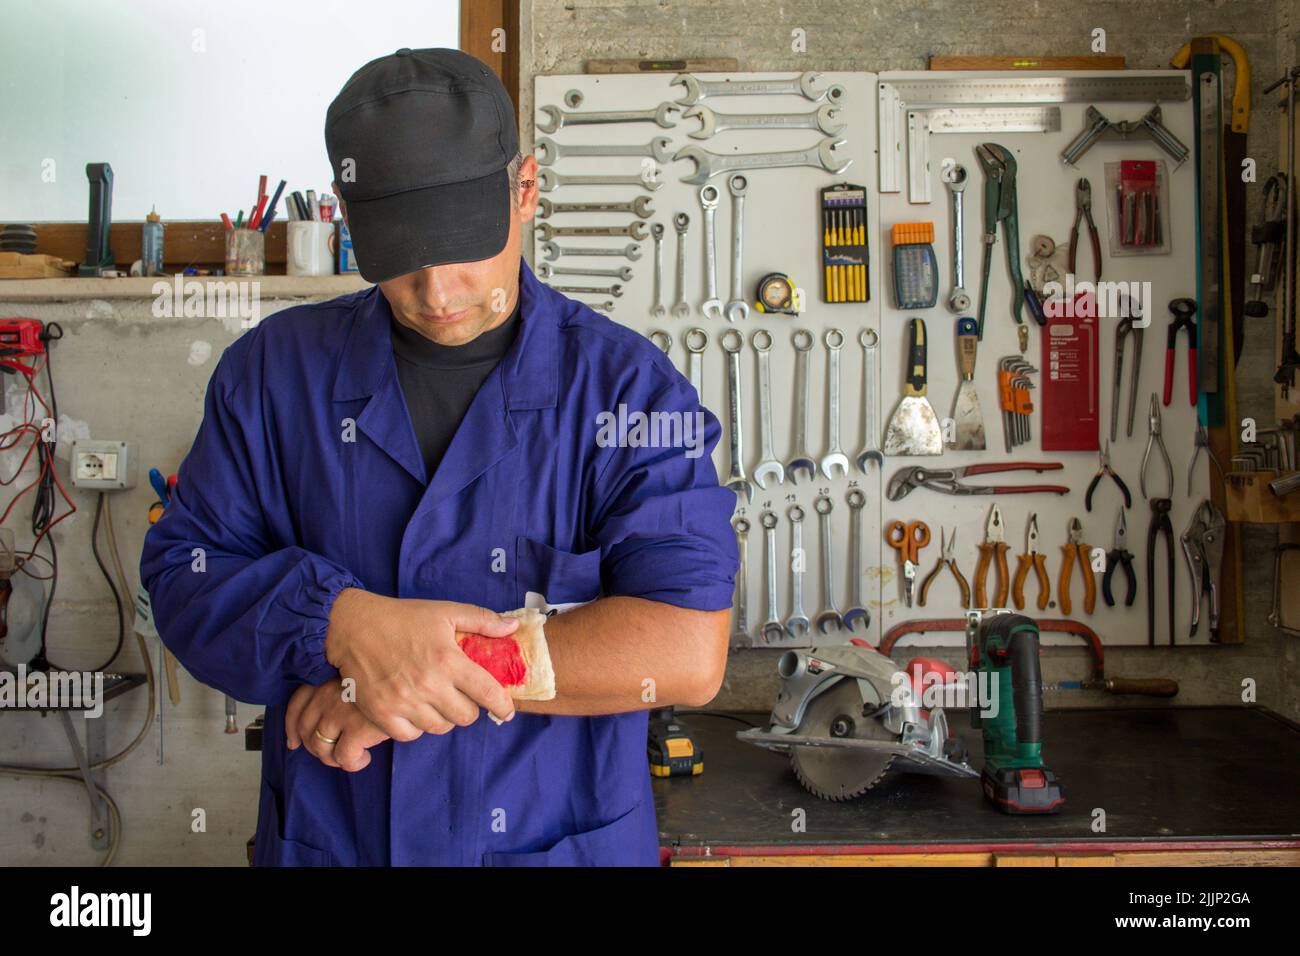 Image of a handyman with a bandaged wound on his arm. Reference to accidents at work Stock Photo